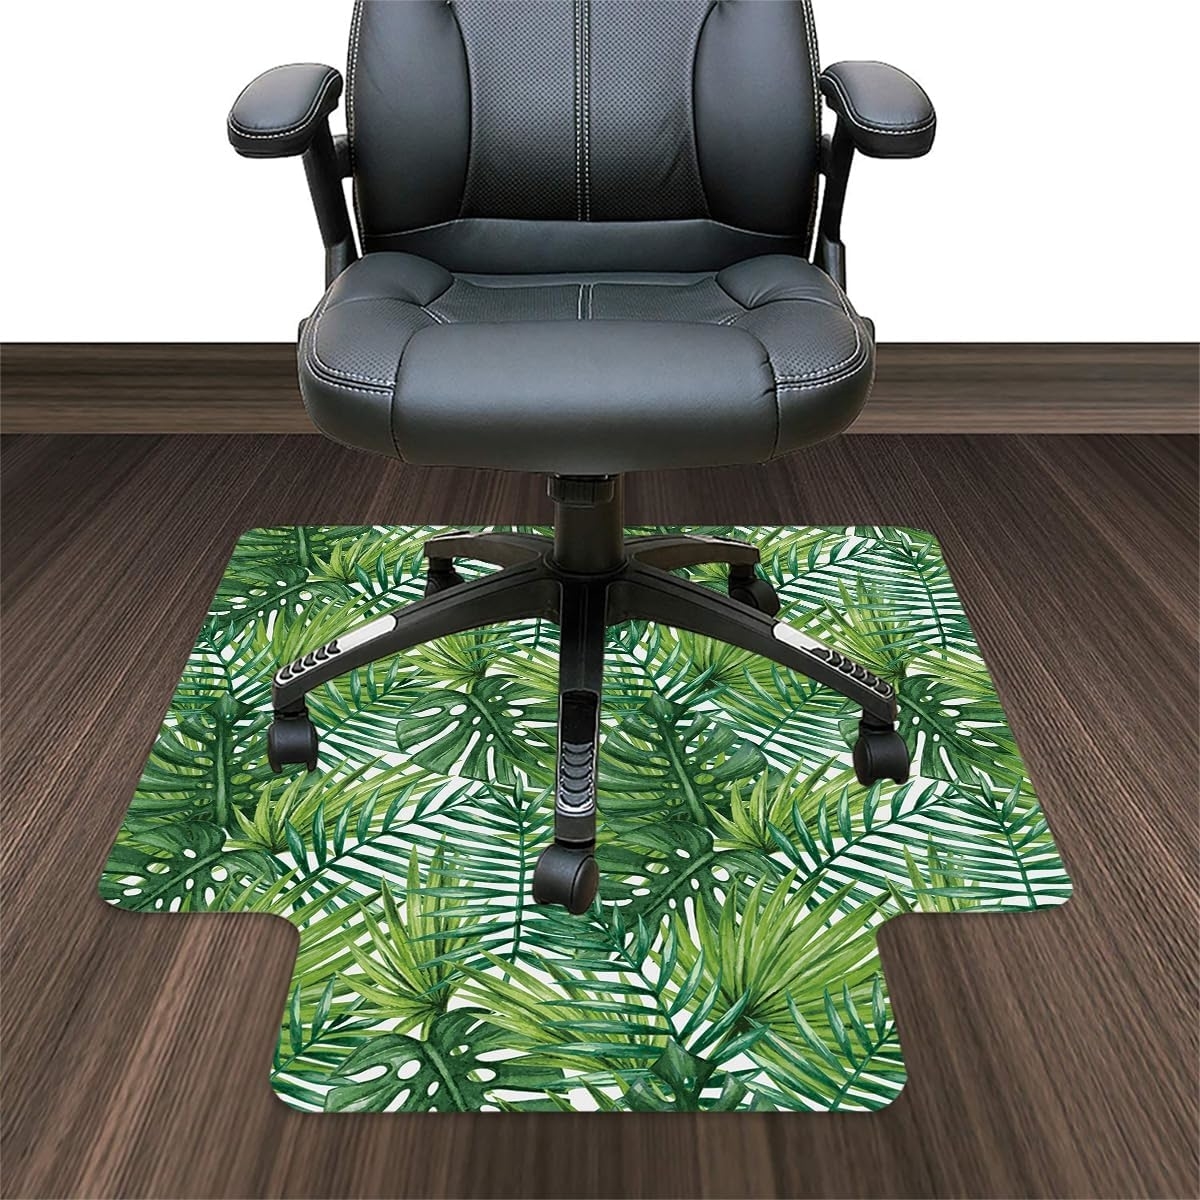 Office chair on a tropical leaf-patterned chair mat